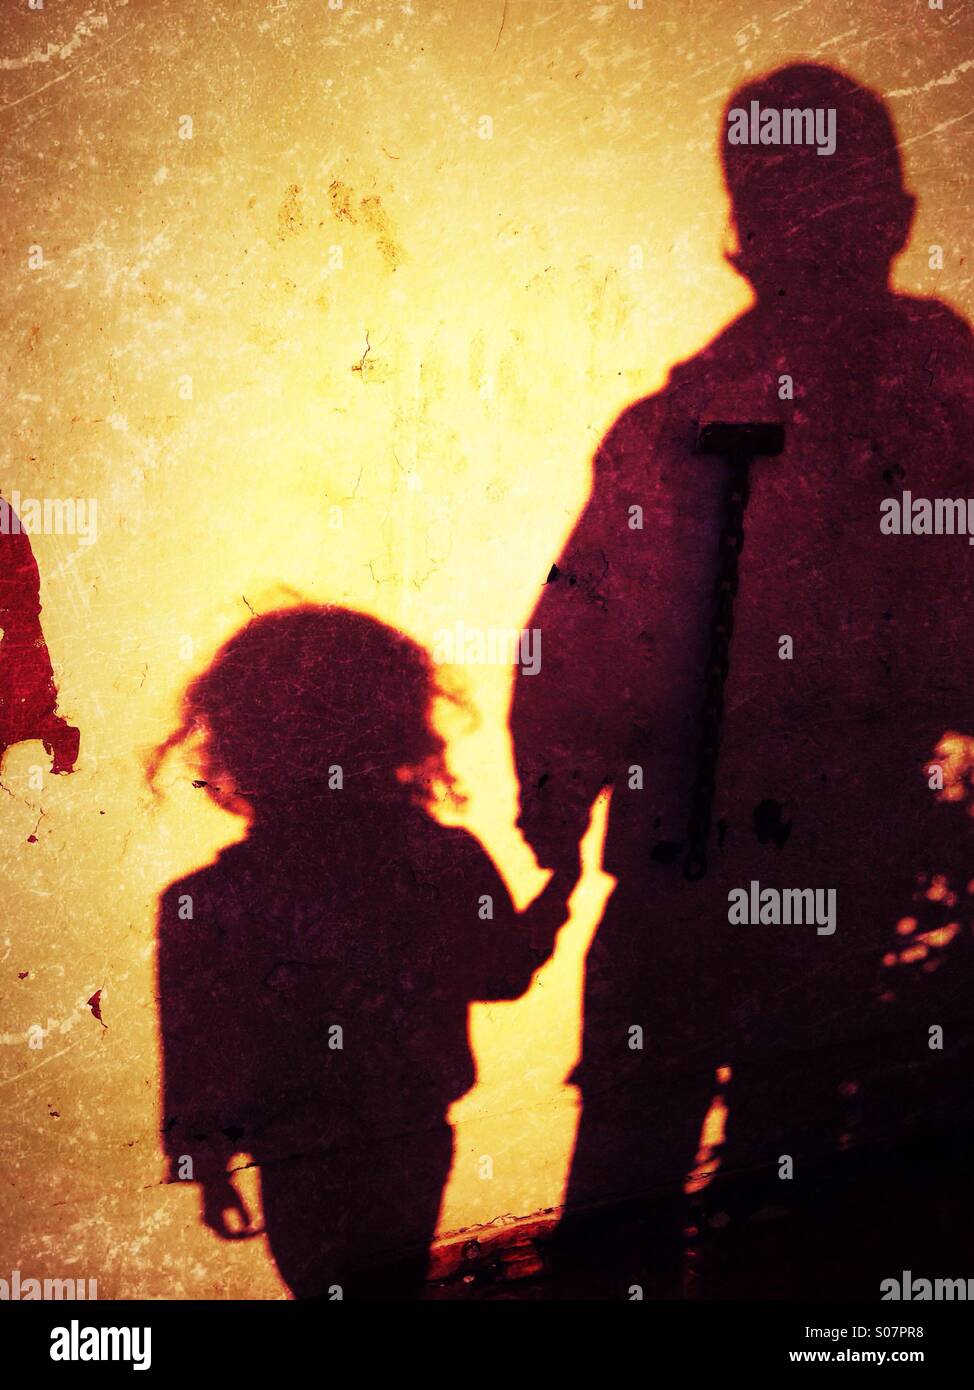 Shadow of man and young girl on wall Stock Photo